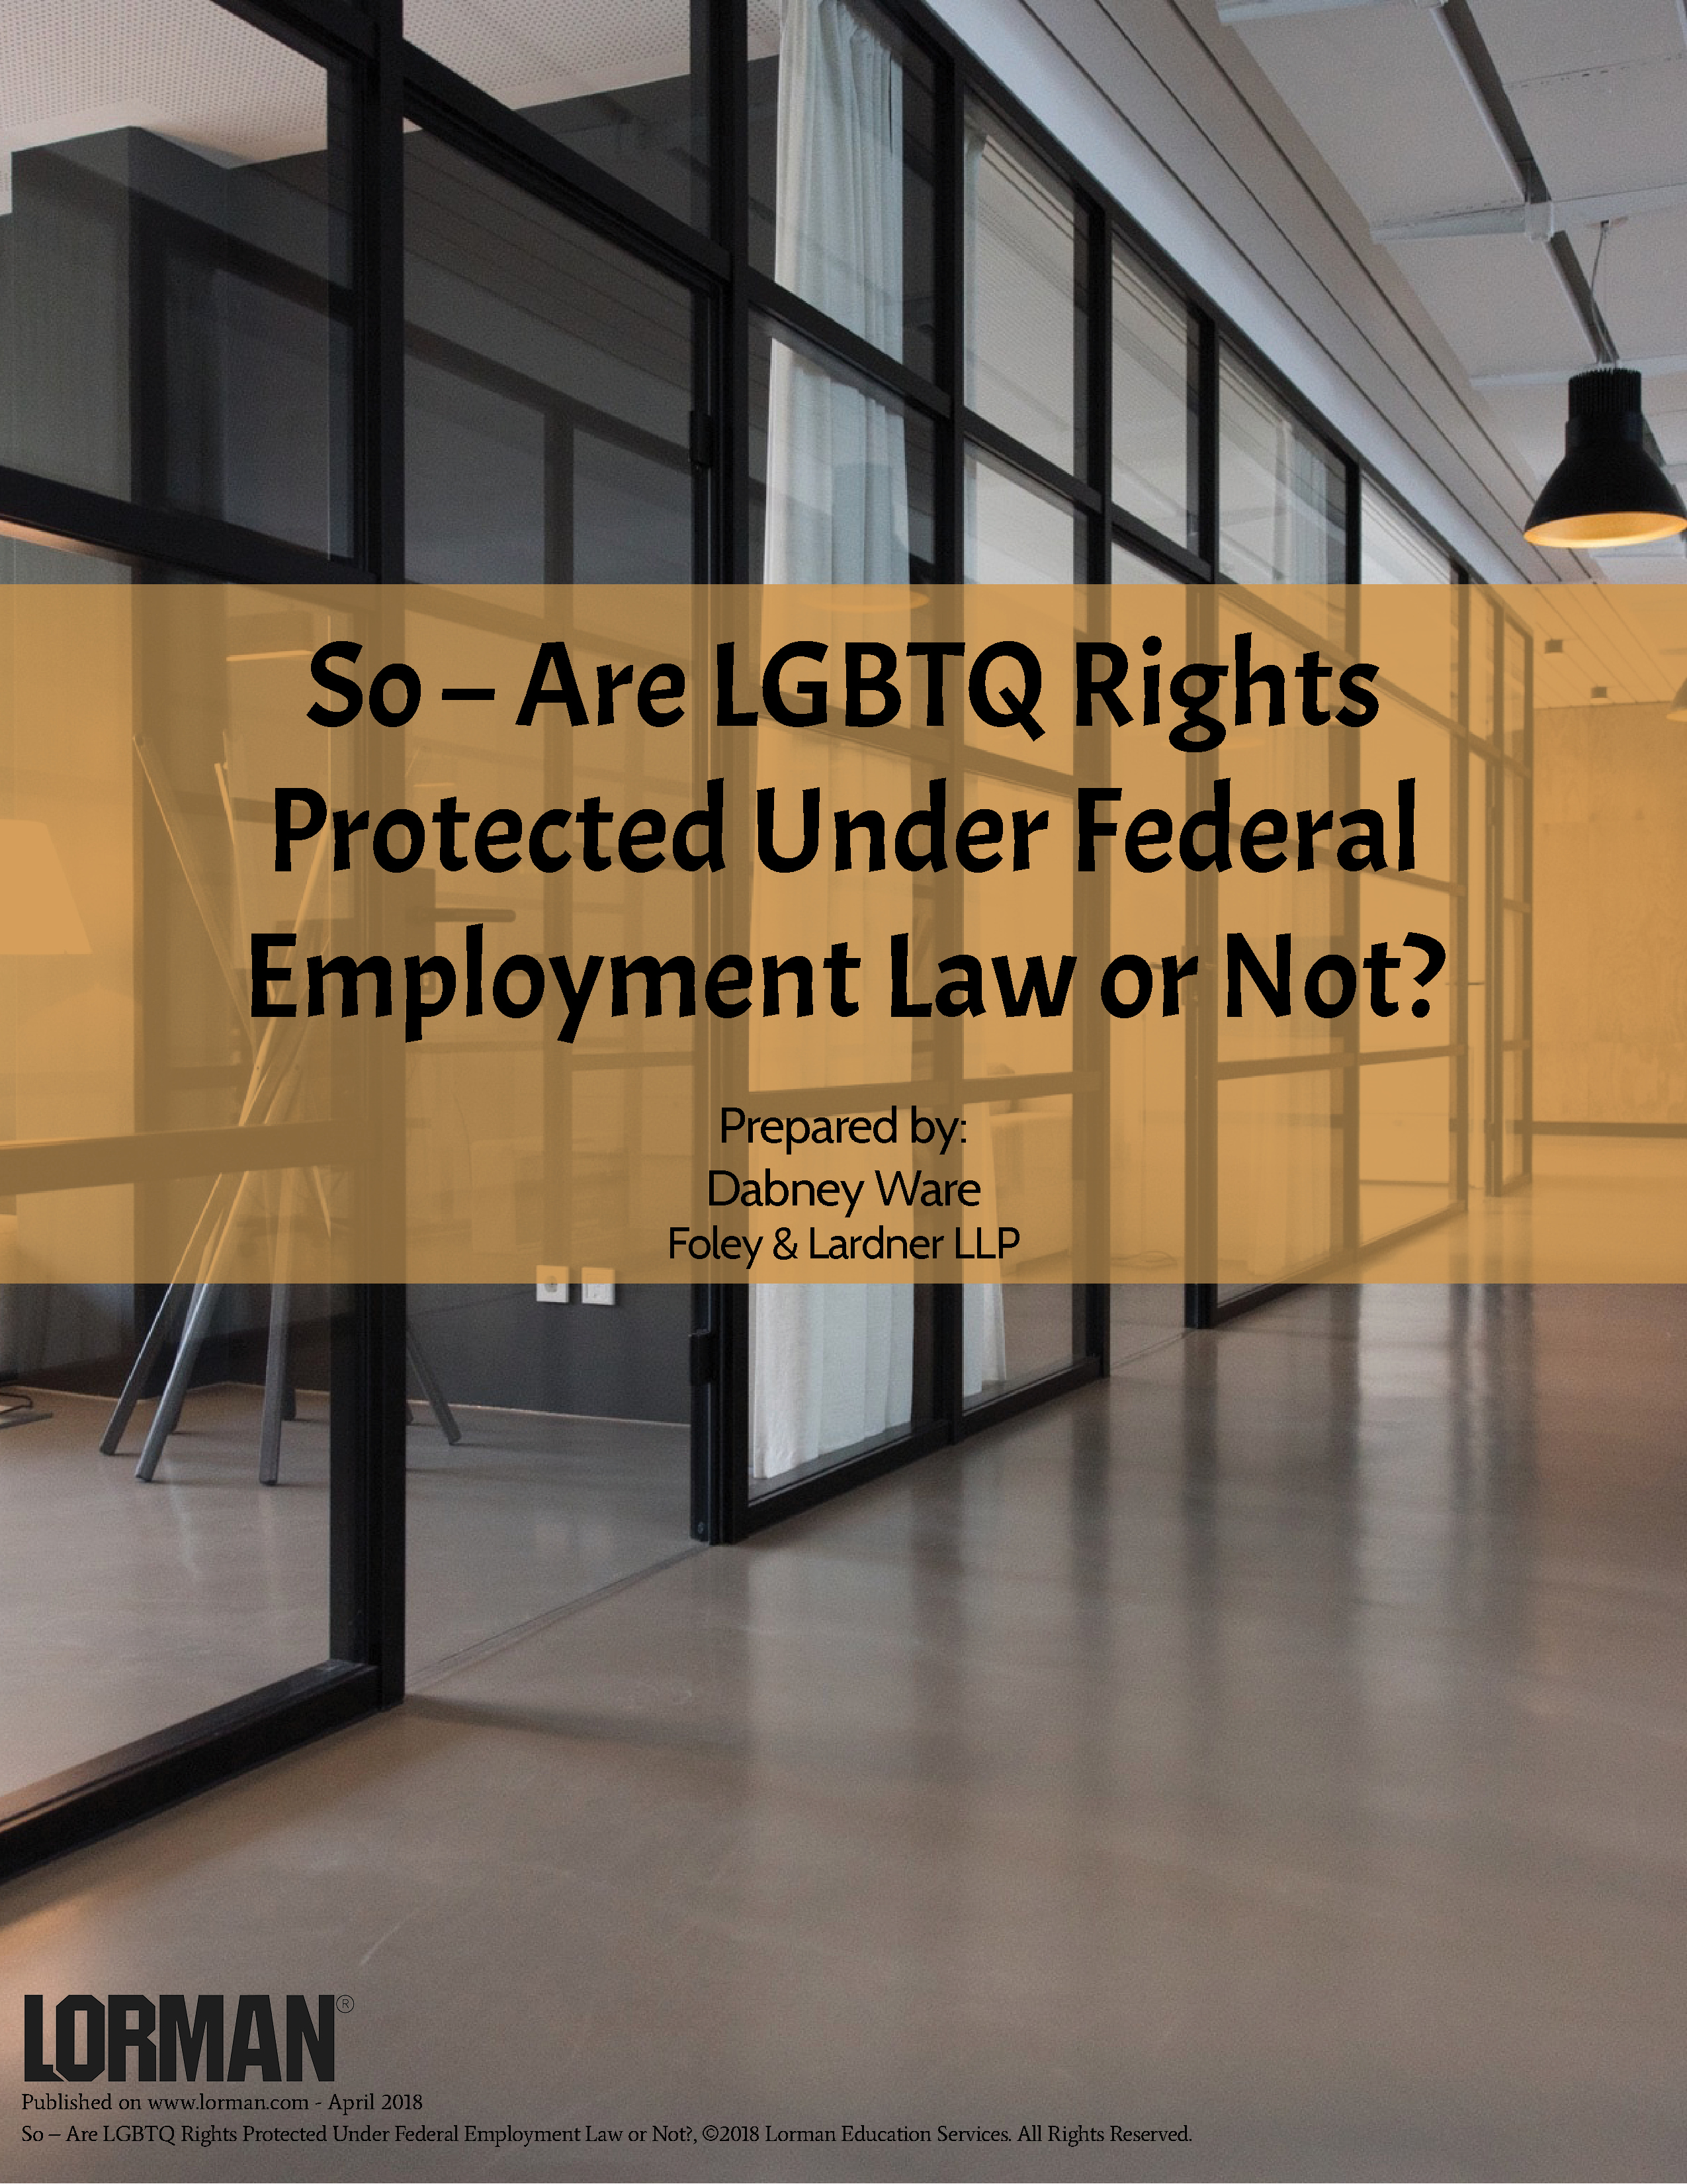 So - Are LGBTQ Rights Protected Under Federal Employment Law or Not?